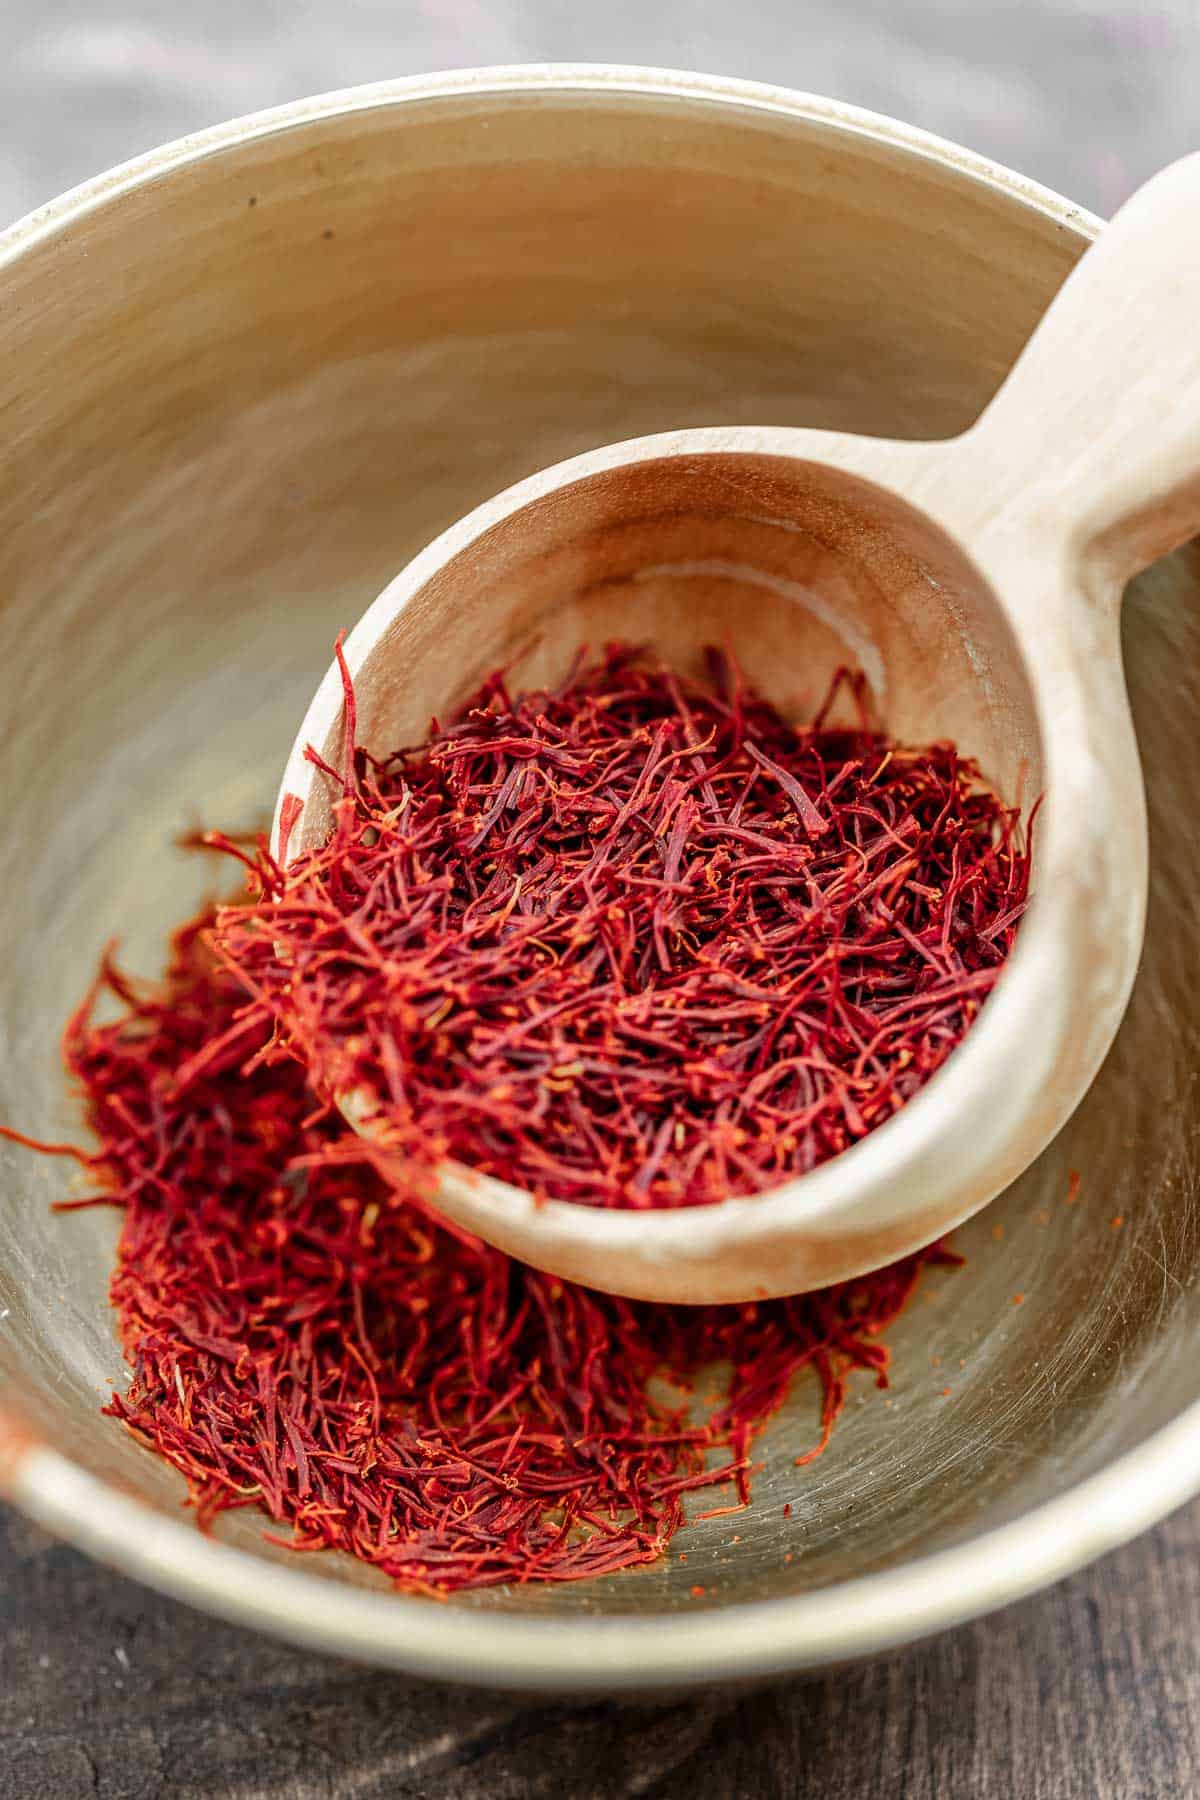 saffron threads being scooped out of a bowl with a wooden scoop.